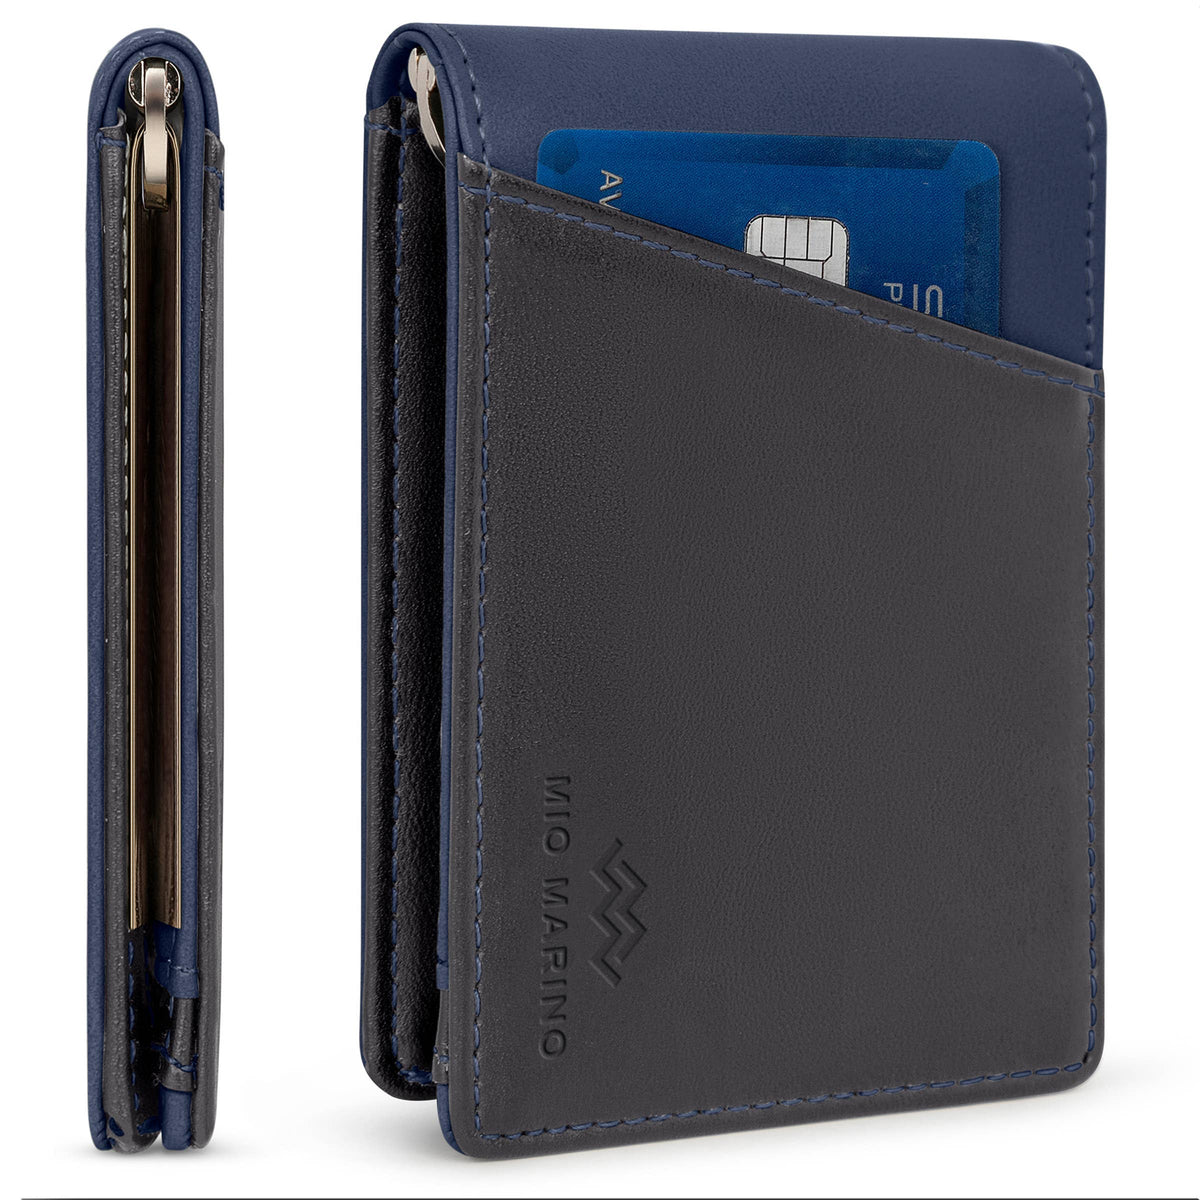 Mio Marino - Men's Slim Bifold Wallet with Quick Access Pull Tab: Black/Gray - WALLET - Synik Clothing - synikclothing.com